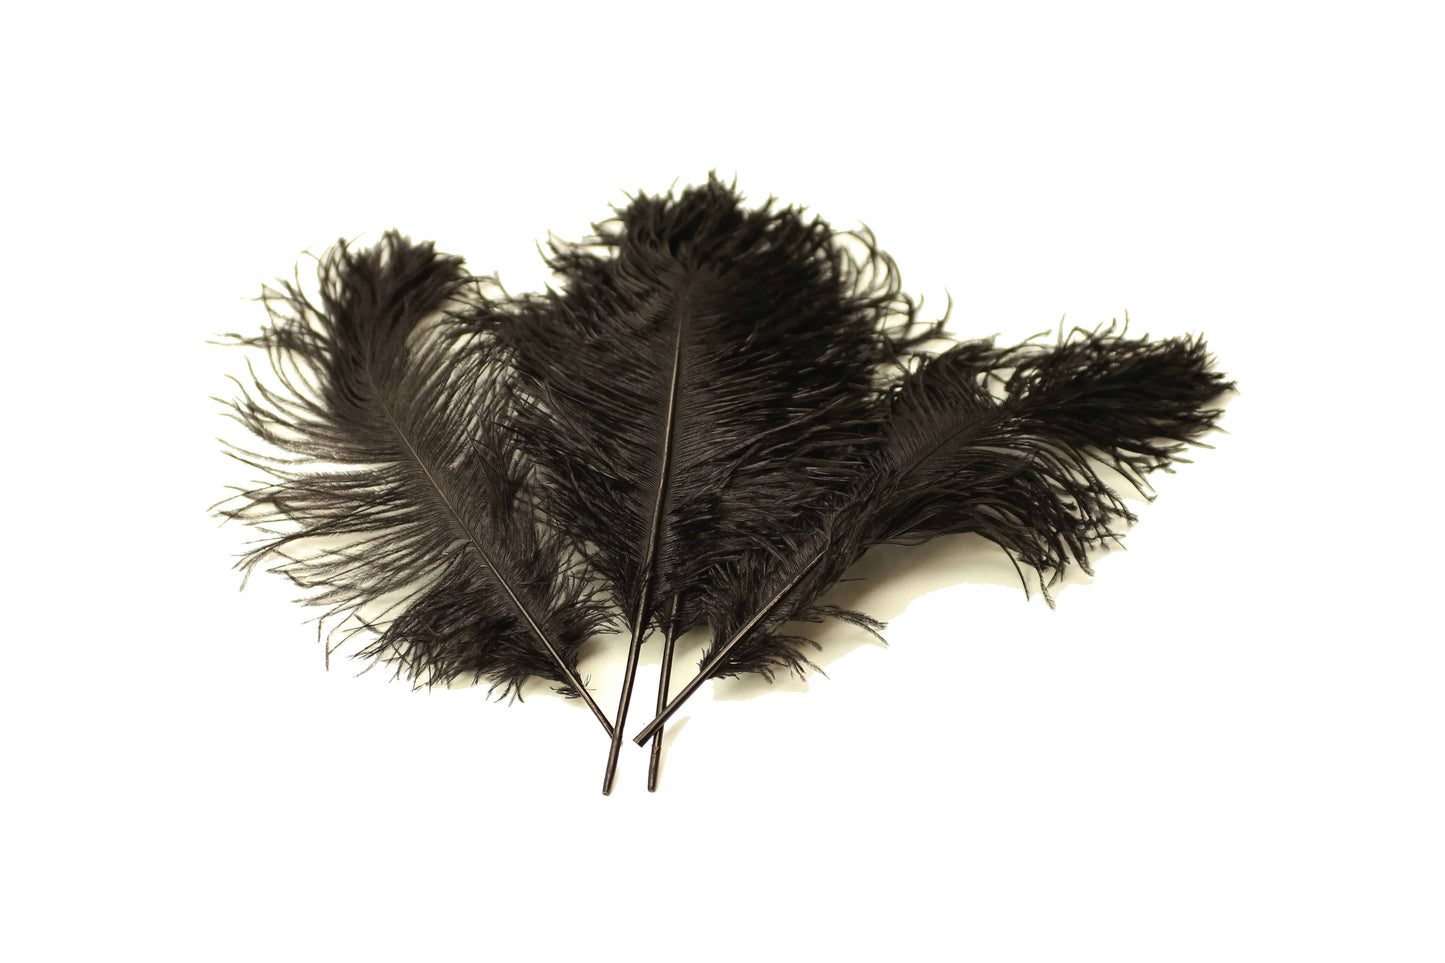 18-24 X-Large Black Ostrich Feathers